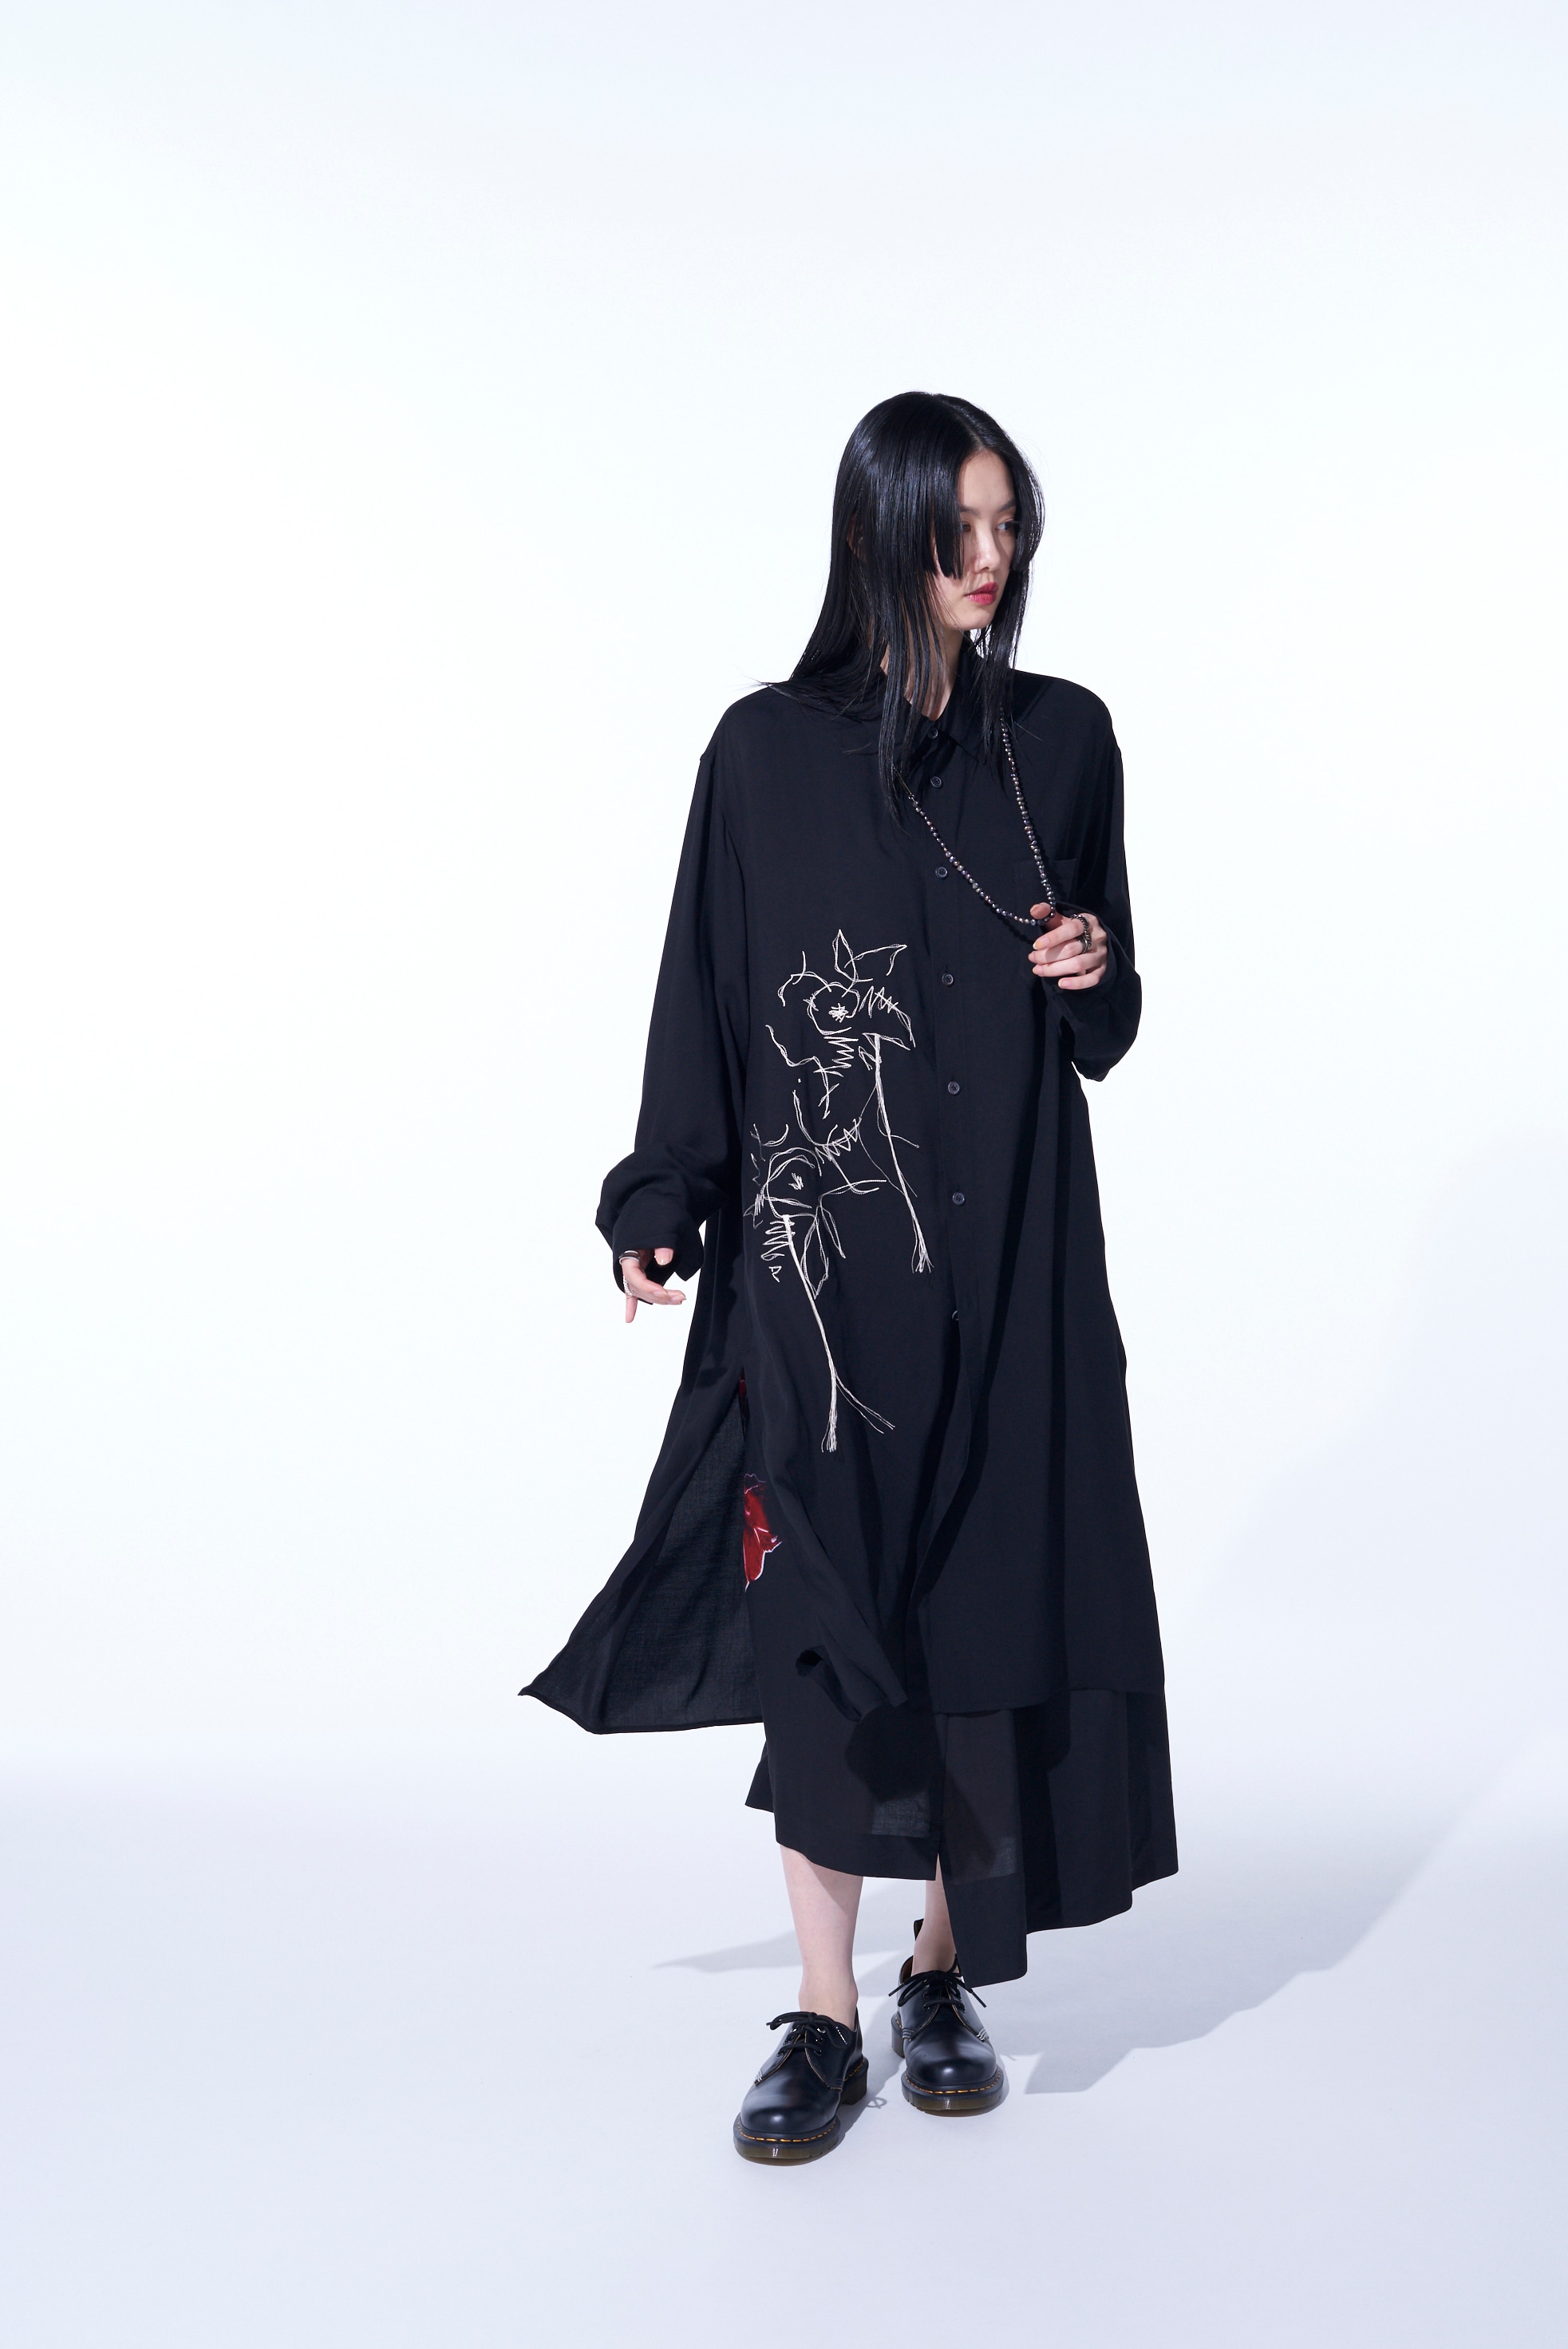 RAYON WASHER TWILL "CACTUS FLOWER" EMBROIDERY LONG SHIRT